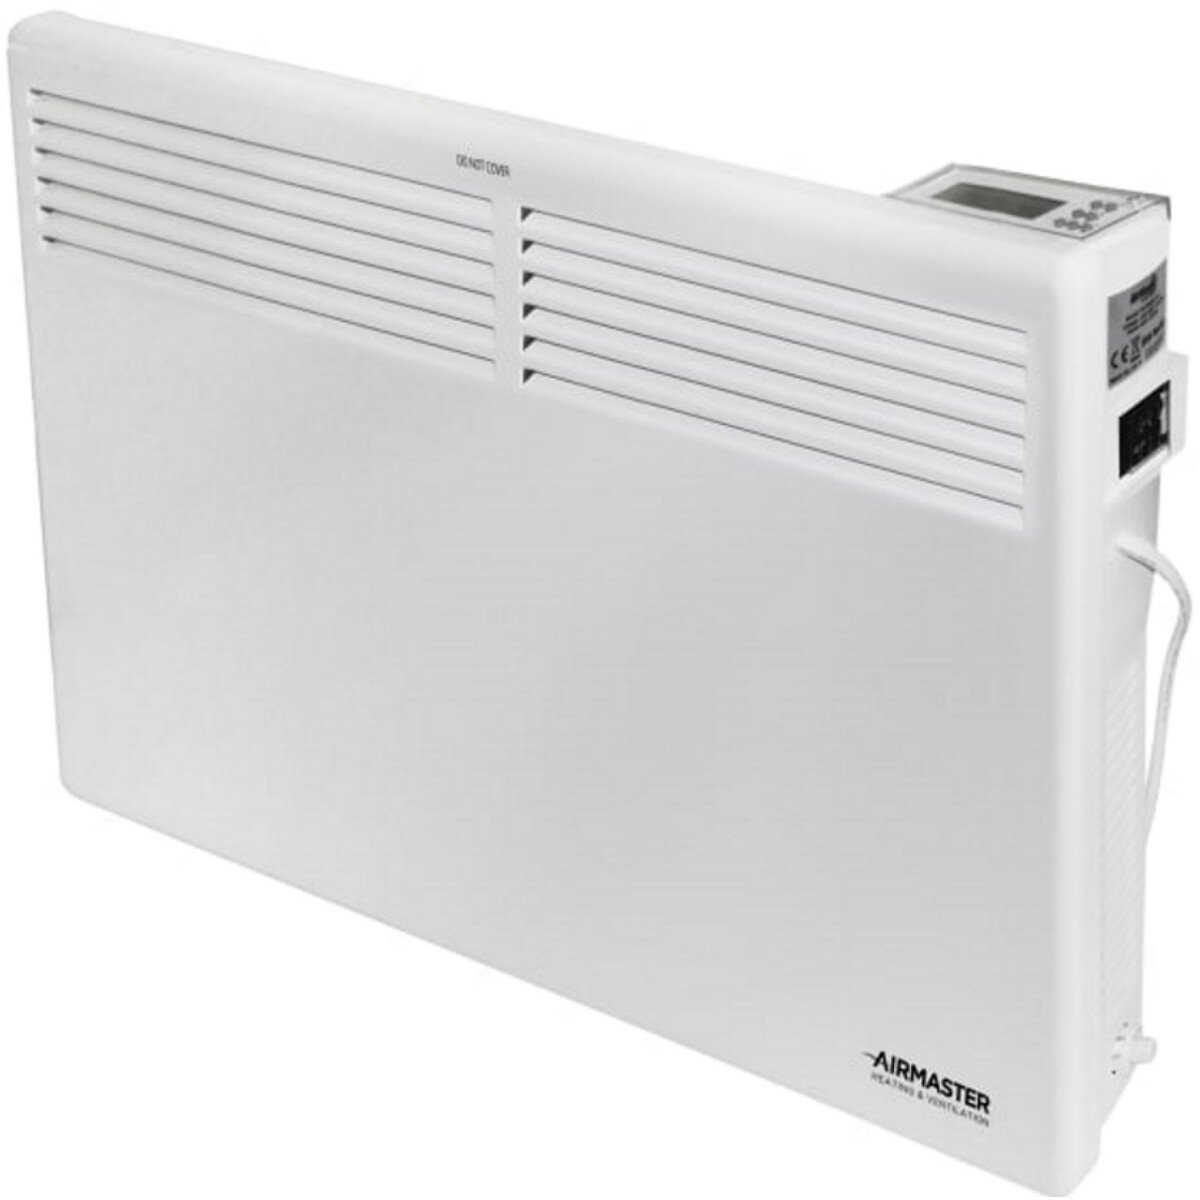 Airmaster Ph15timlcdn Wall Mounting Digital Panel Heater 15kw Airph15tim From Lawson His 9148